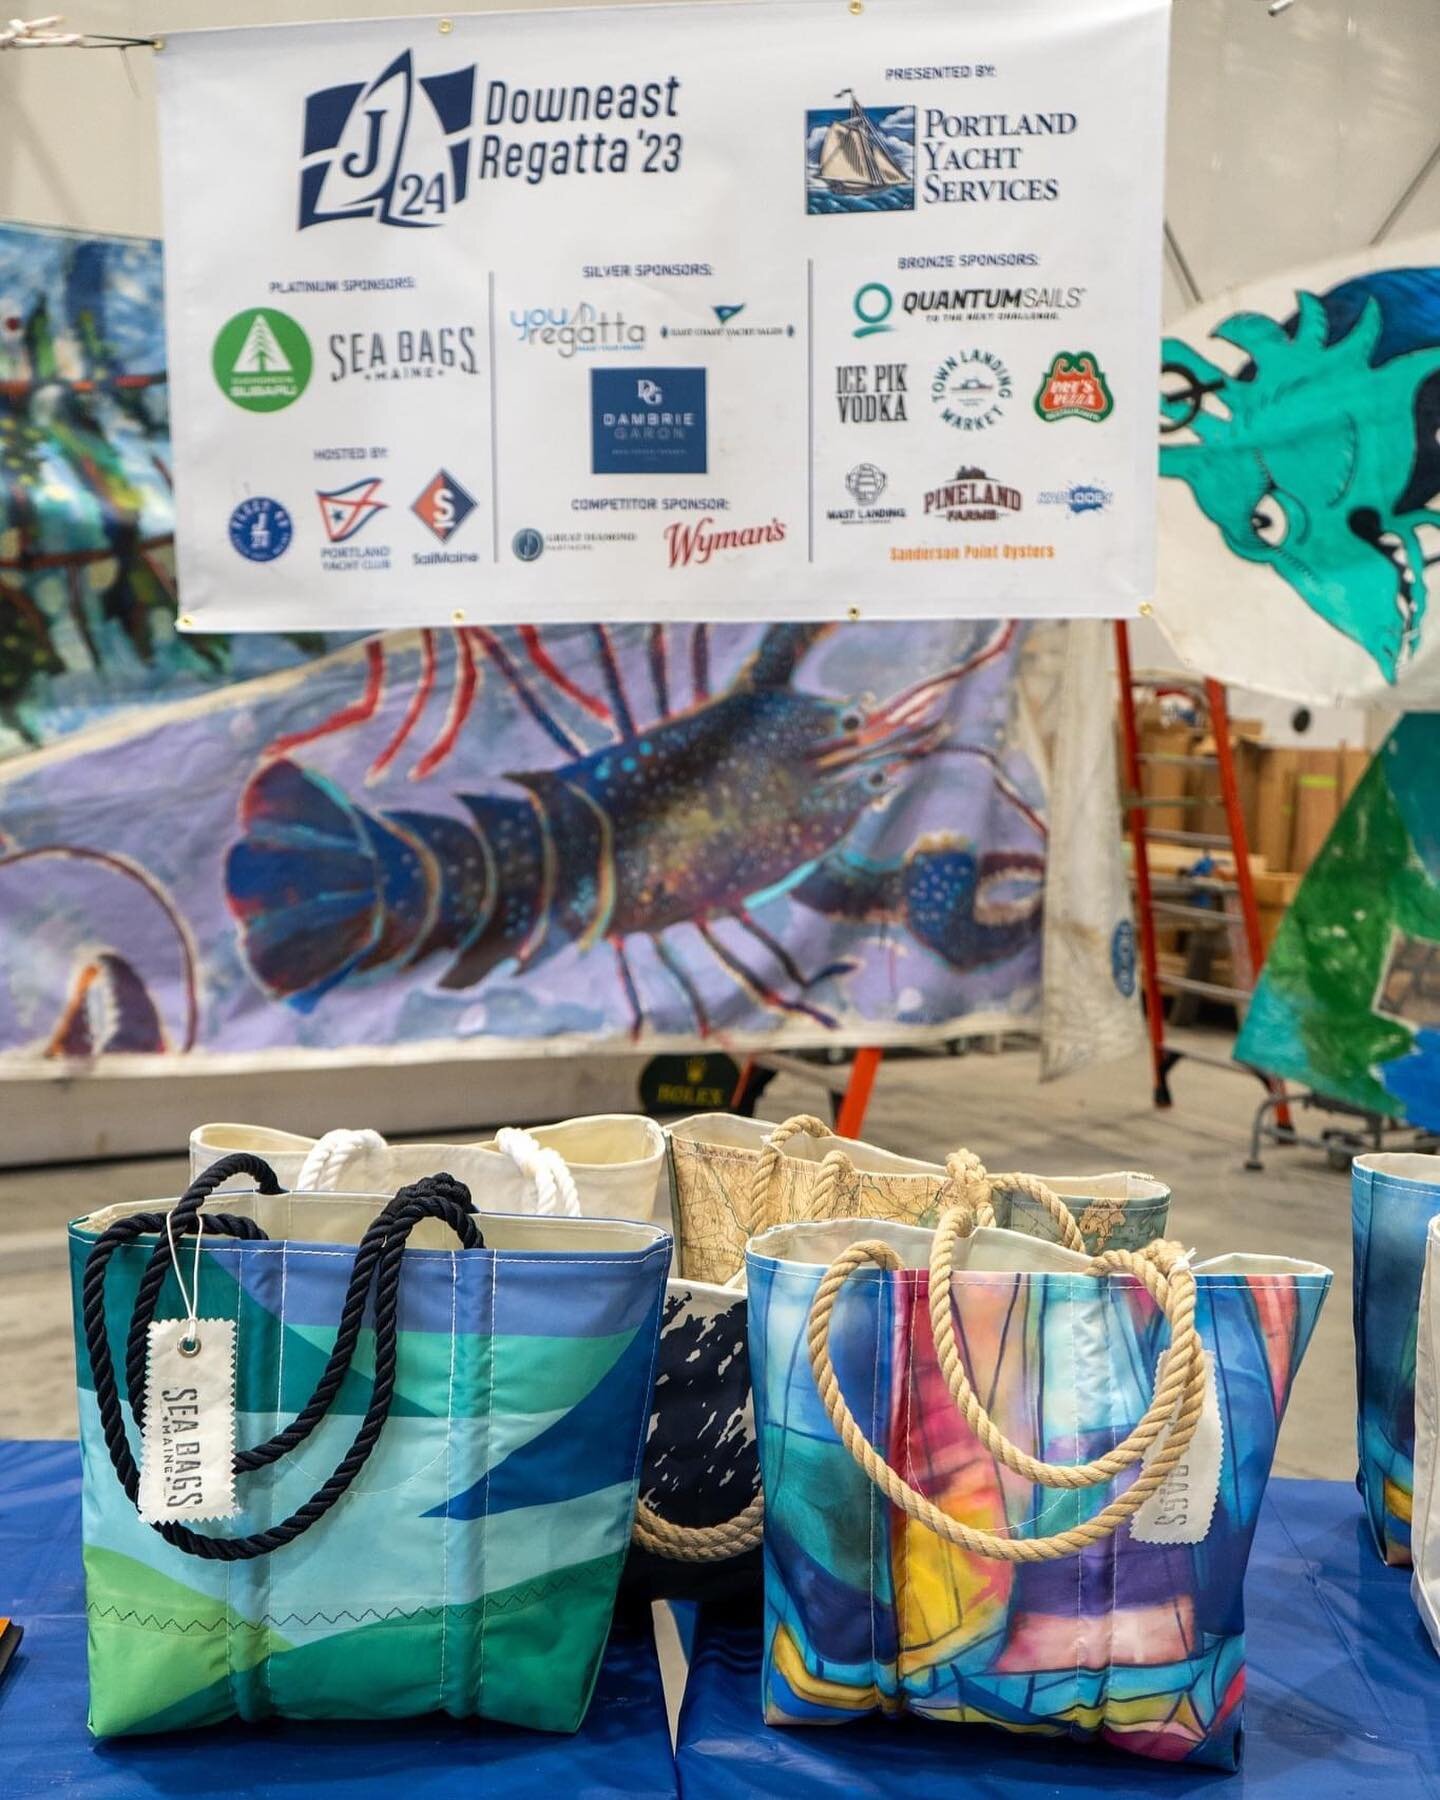 Top three boats at the DOWNEAST REGATTA walked away with these beautiful @seabagsmaine totes! 

The colorful designs were hand-picked to represent sailing in Casco Bay&mdash; THANK YOU SEA BAGS!

#seabags #seabagsmaine #sponsor #downeastregatta #j24r